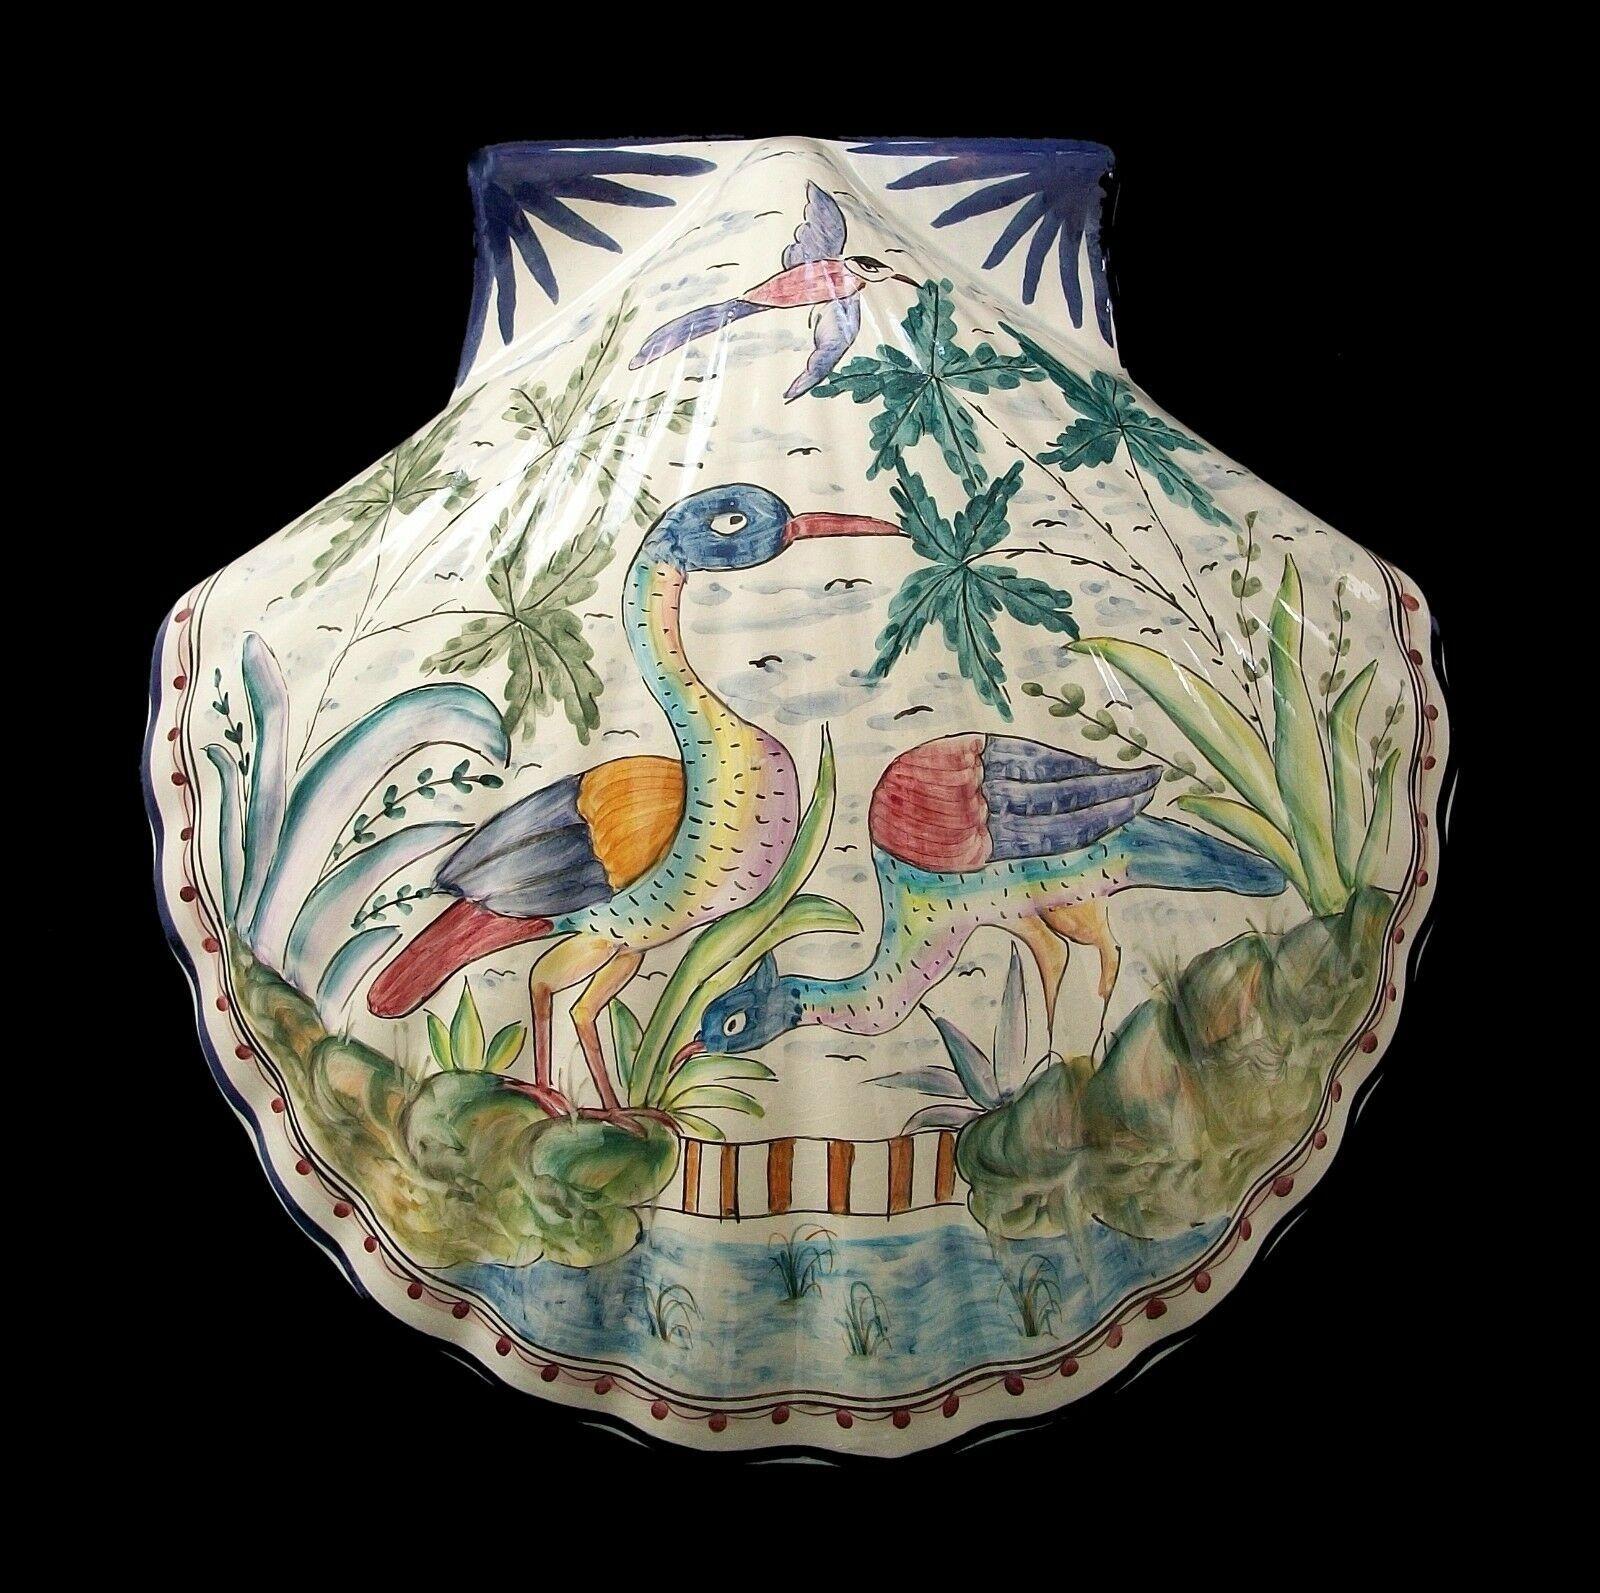 BRICOLARTE - Rare hand painted shell form majolica wall decoration - artist signed - Portugal (Pombal) - mid 20th century. 

Excellent vintage condition - no loss - no damage - no repairs - minor glaze crackle from age and use - ready to